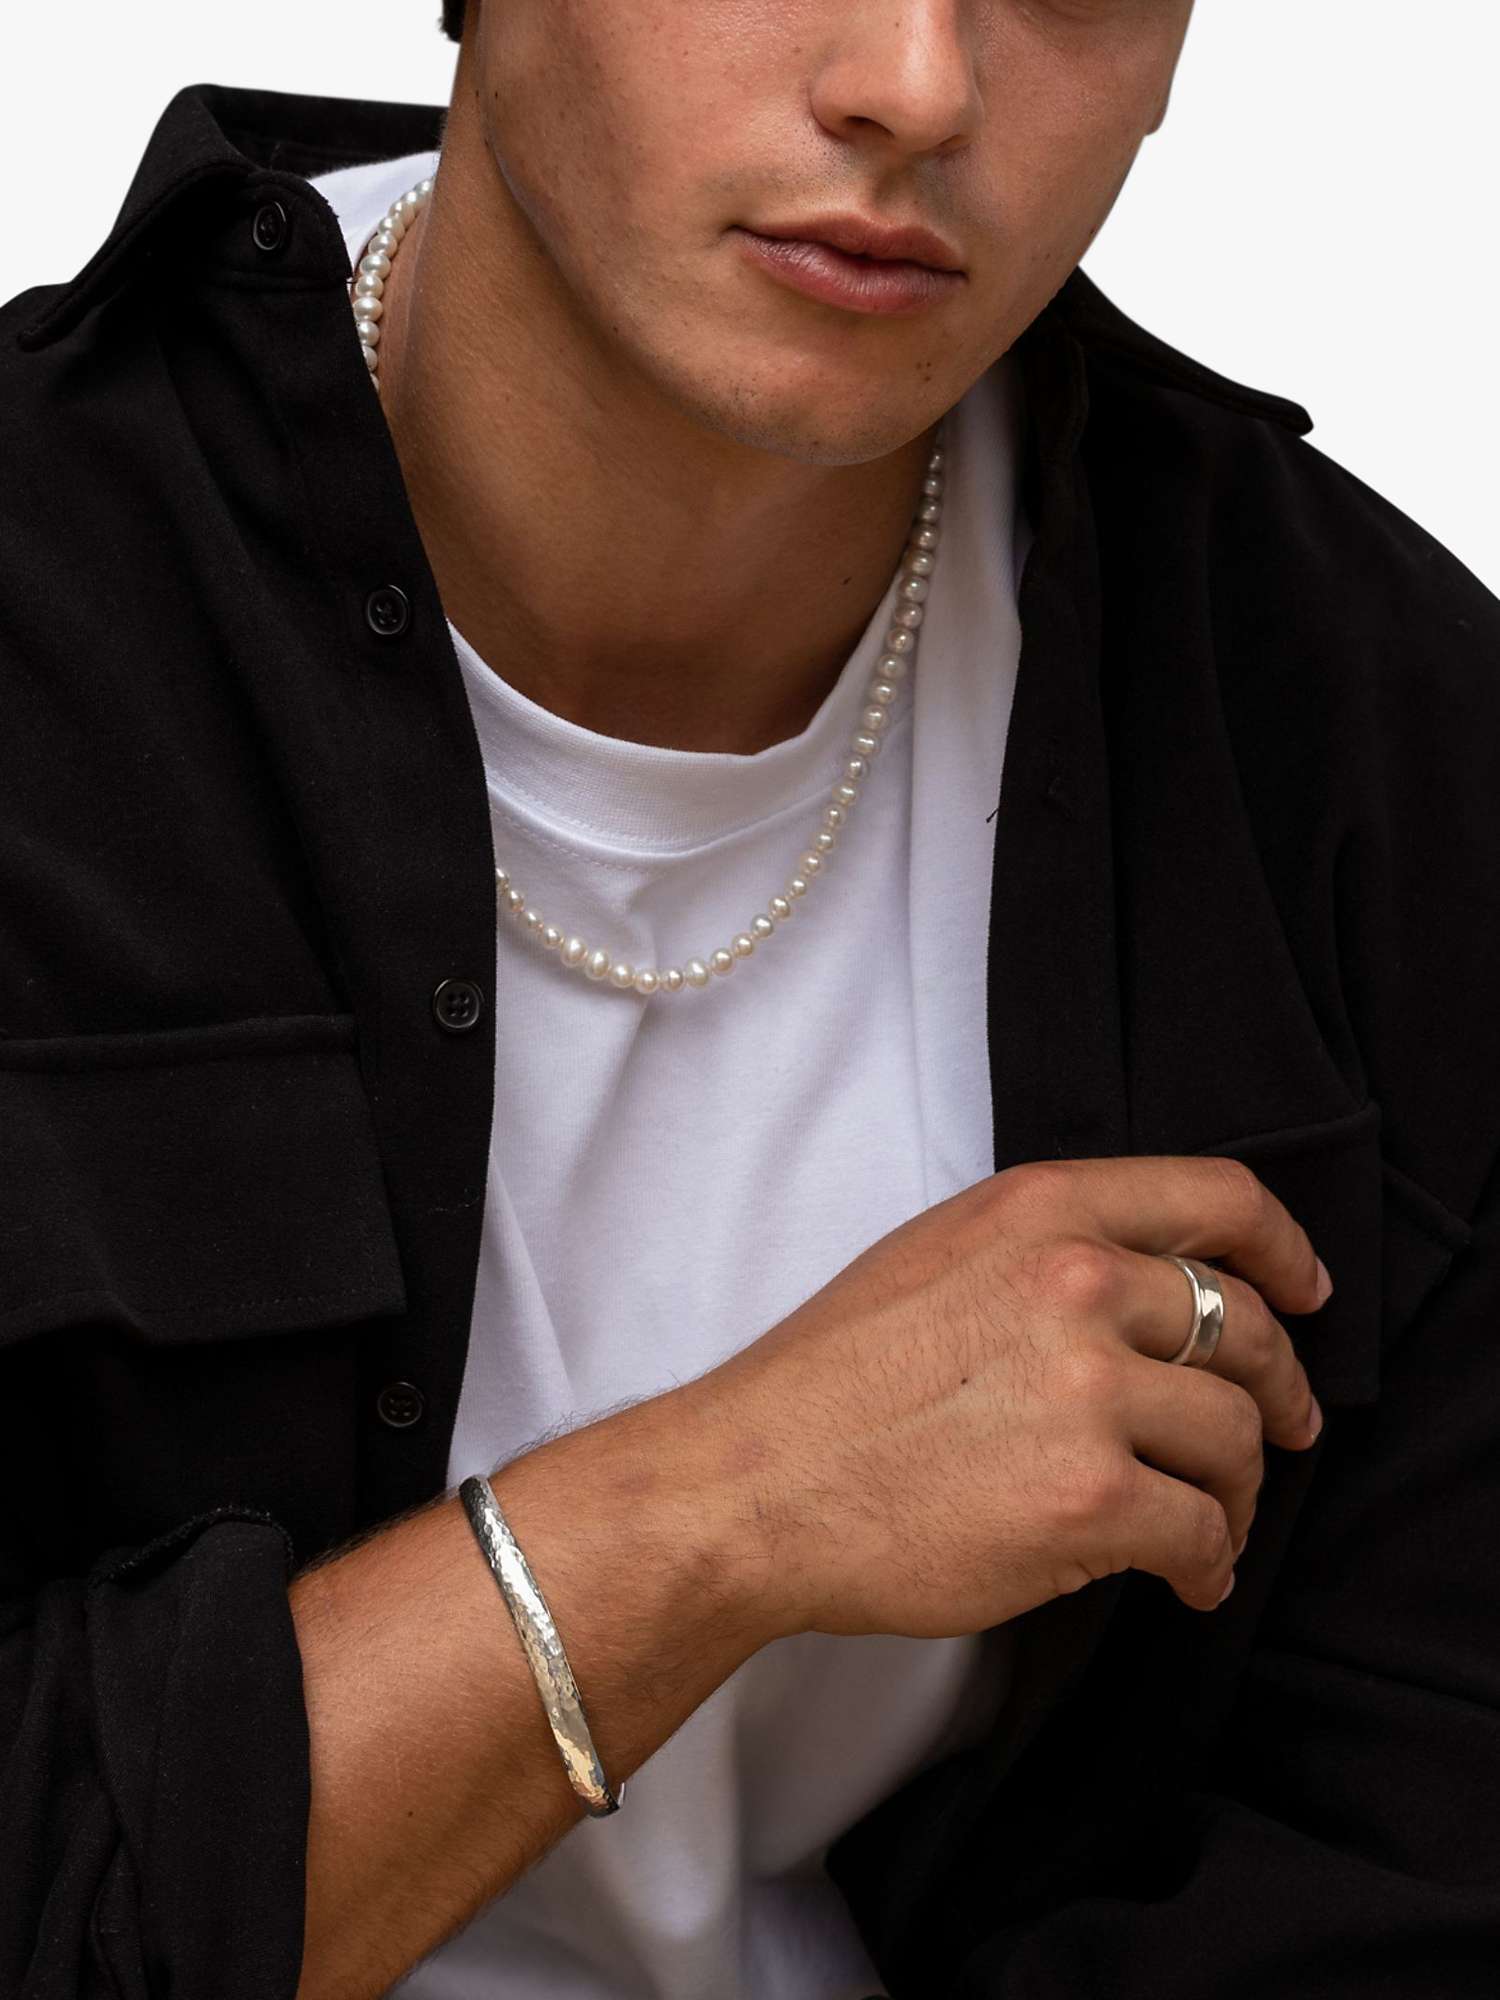 Buy Dower & Hall Men's Freshwater Pearl Collar Necklace, White/Silver Online at johnlewis.com